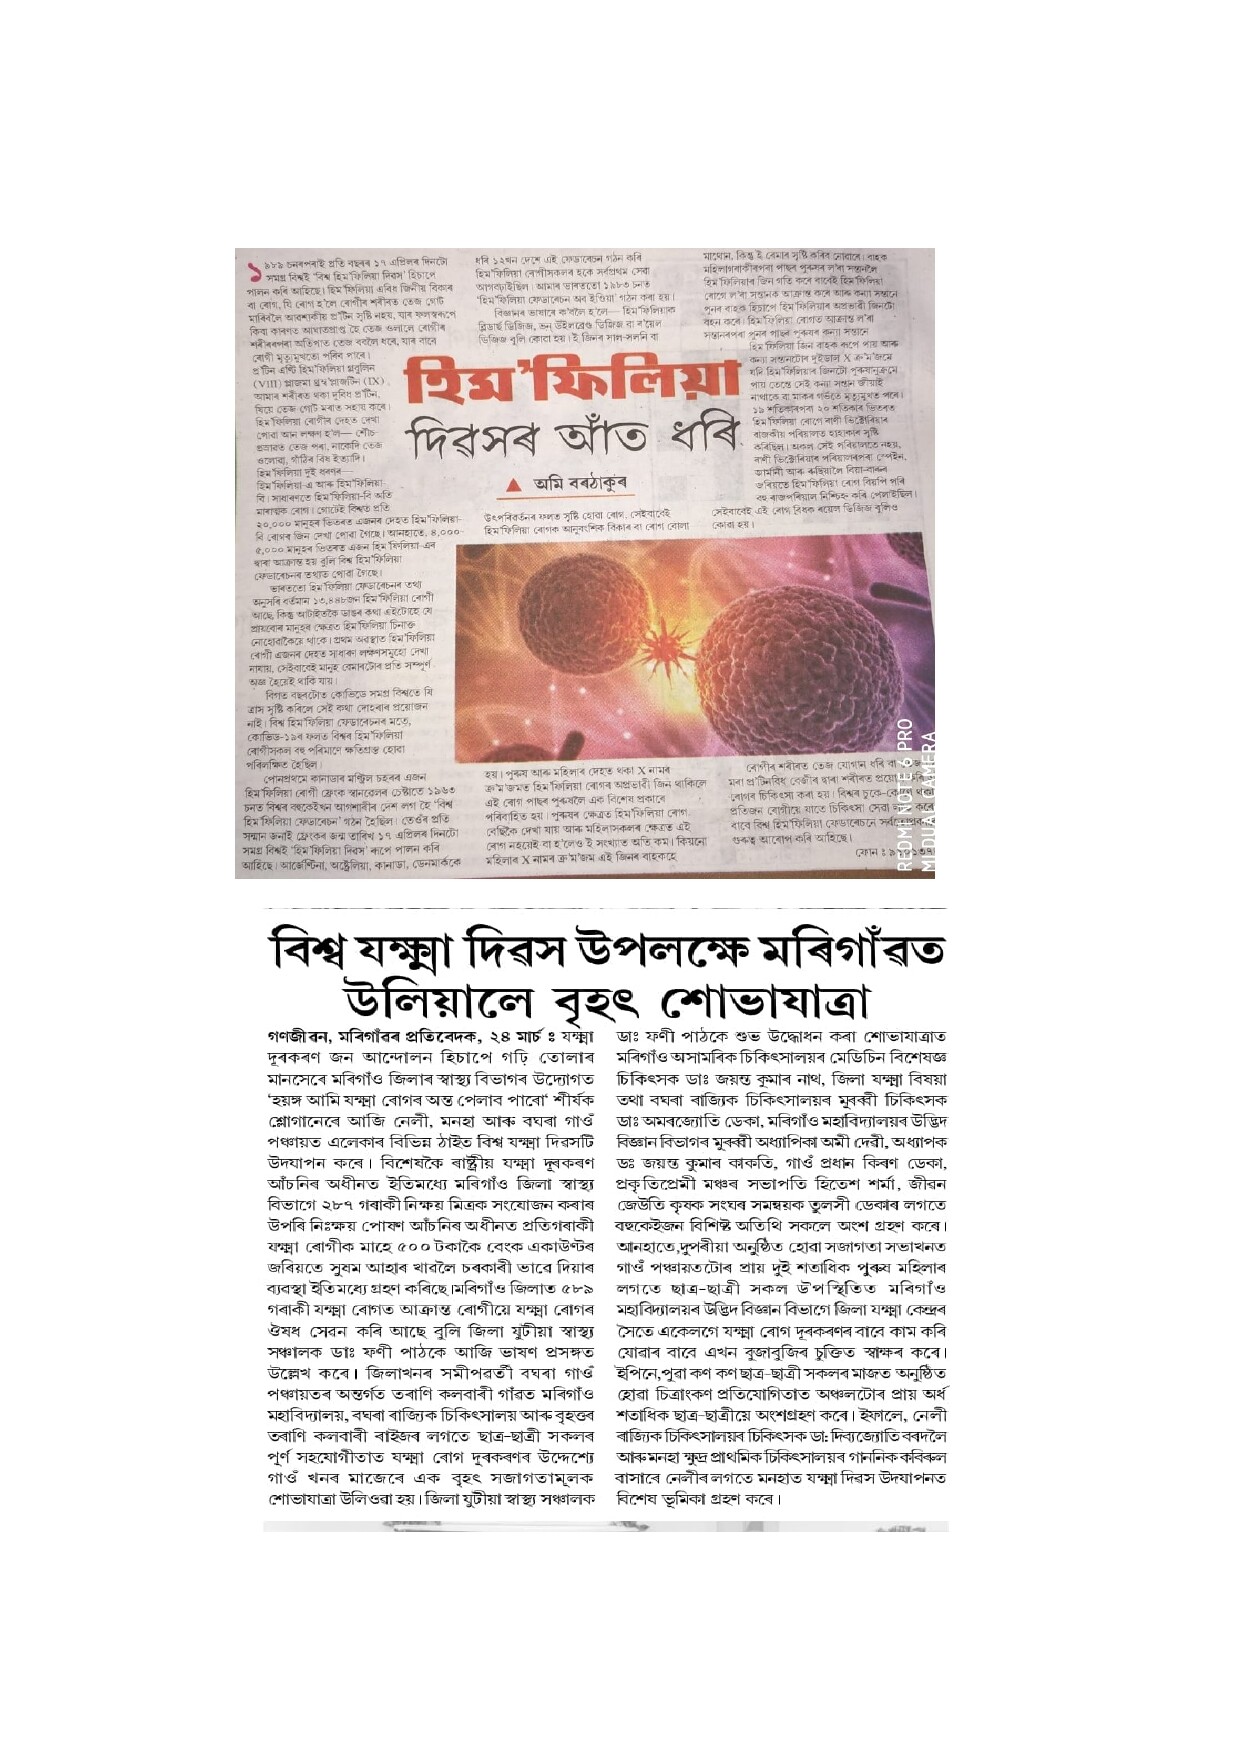 Some articles written by Mrs. Ami Devi ( HOD, Associate Professor, Dept. of Botany) published in the Assam Tribune Newspaper.